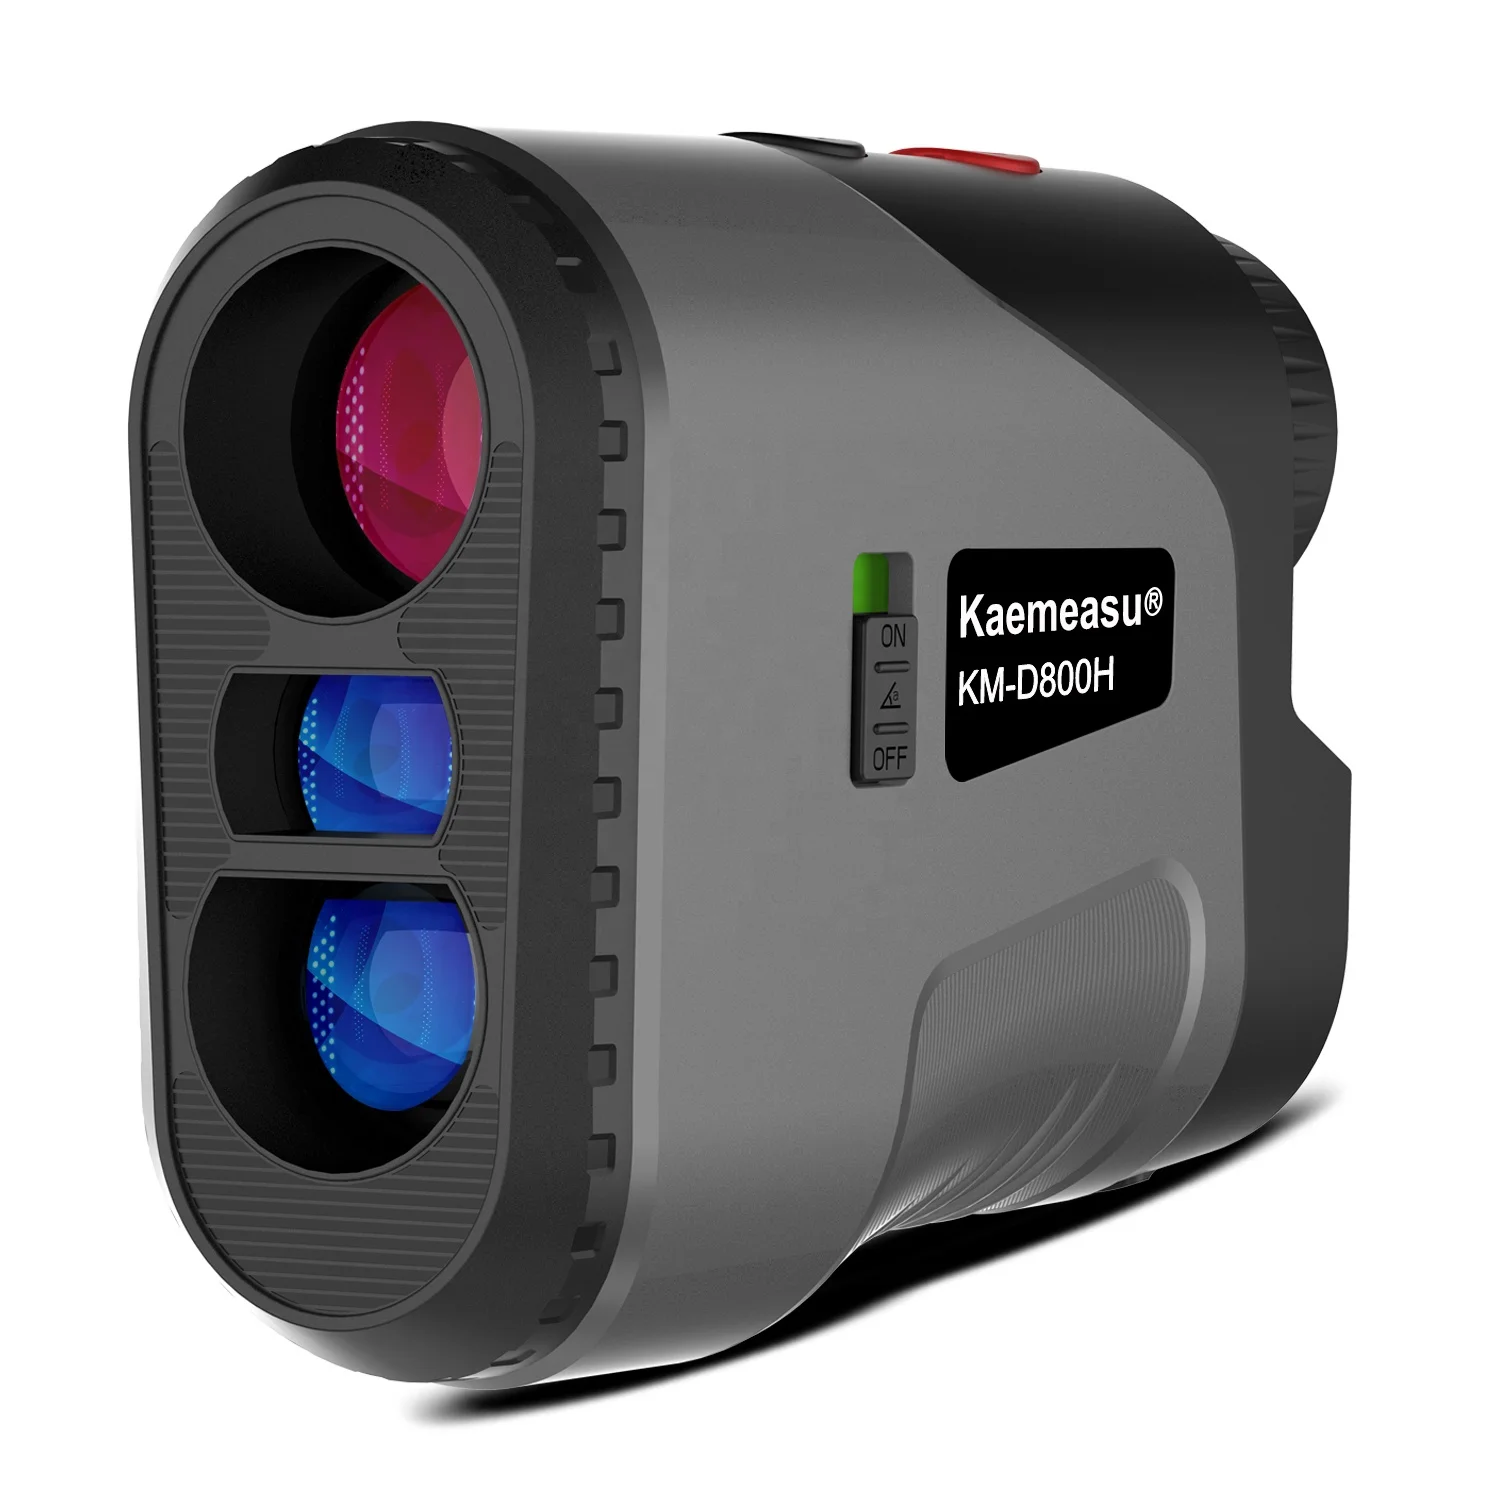 Amazon hot sale distance meter 5~1000m Hunting Range Finder Telescope golf laser rangefinders with slope switch